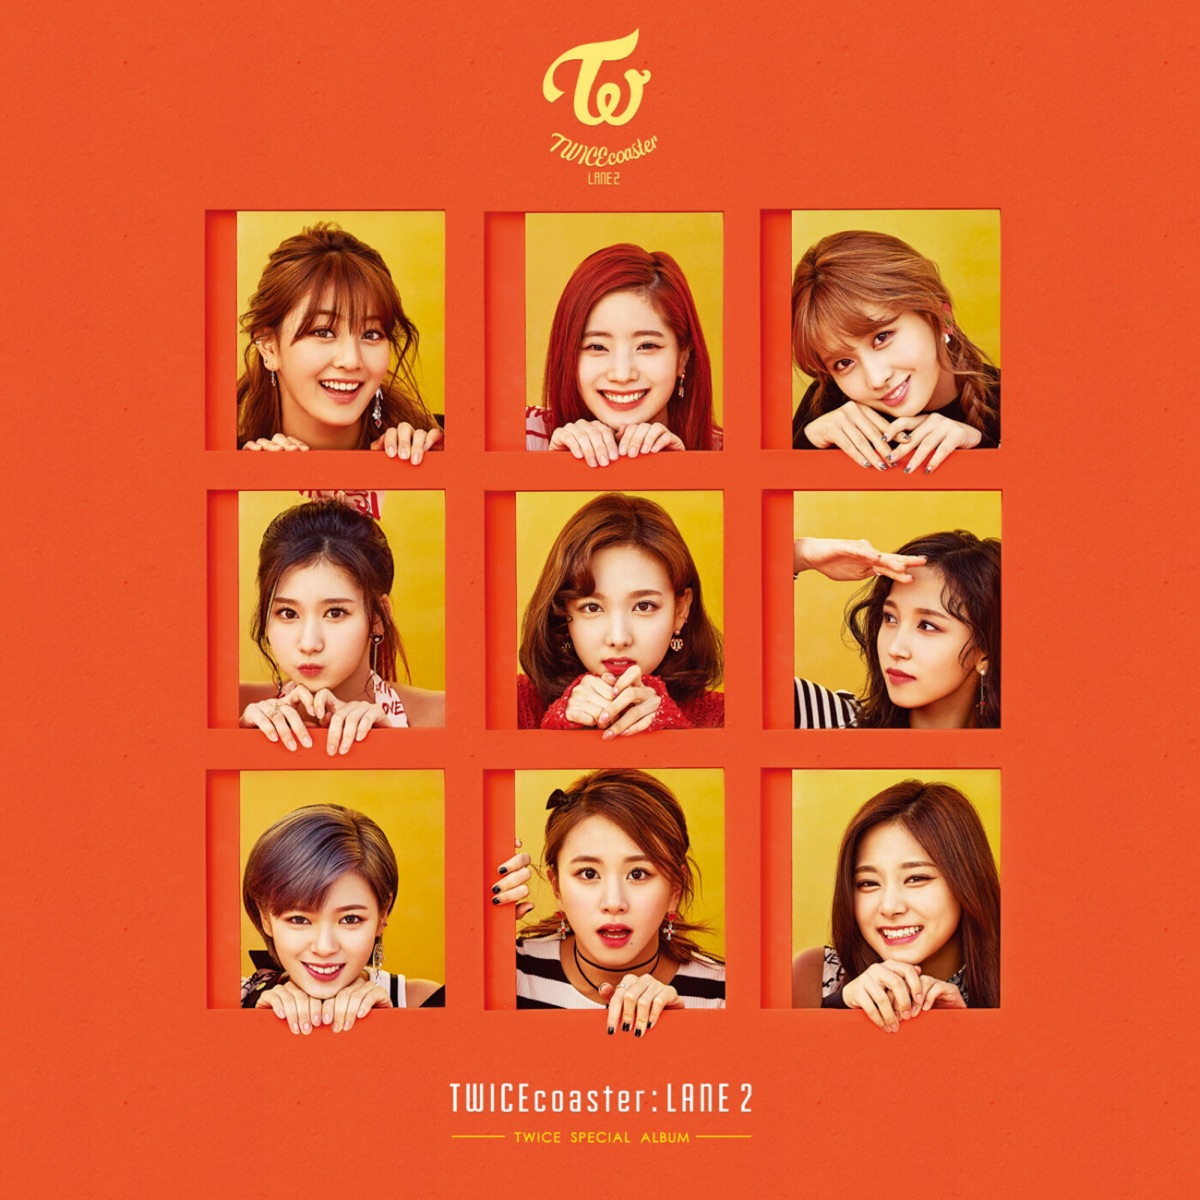 READY TO BE - Album by TWICE - Apple Music